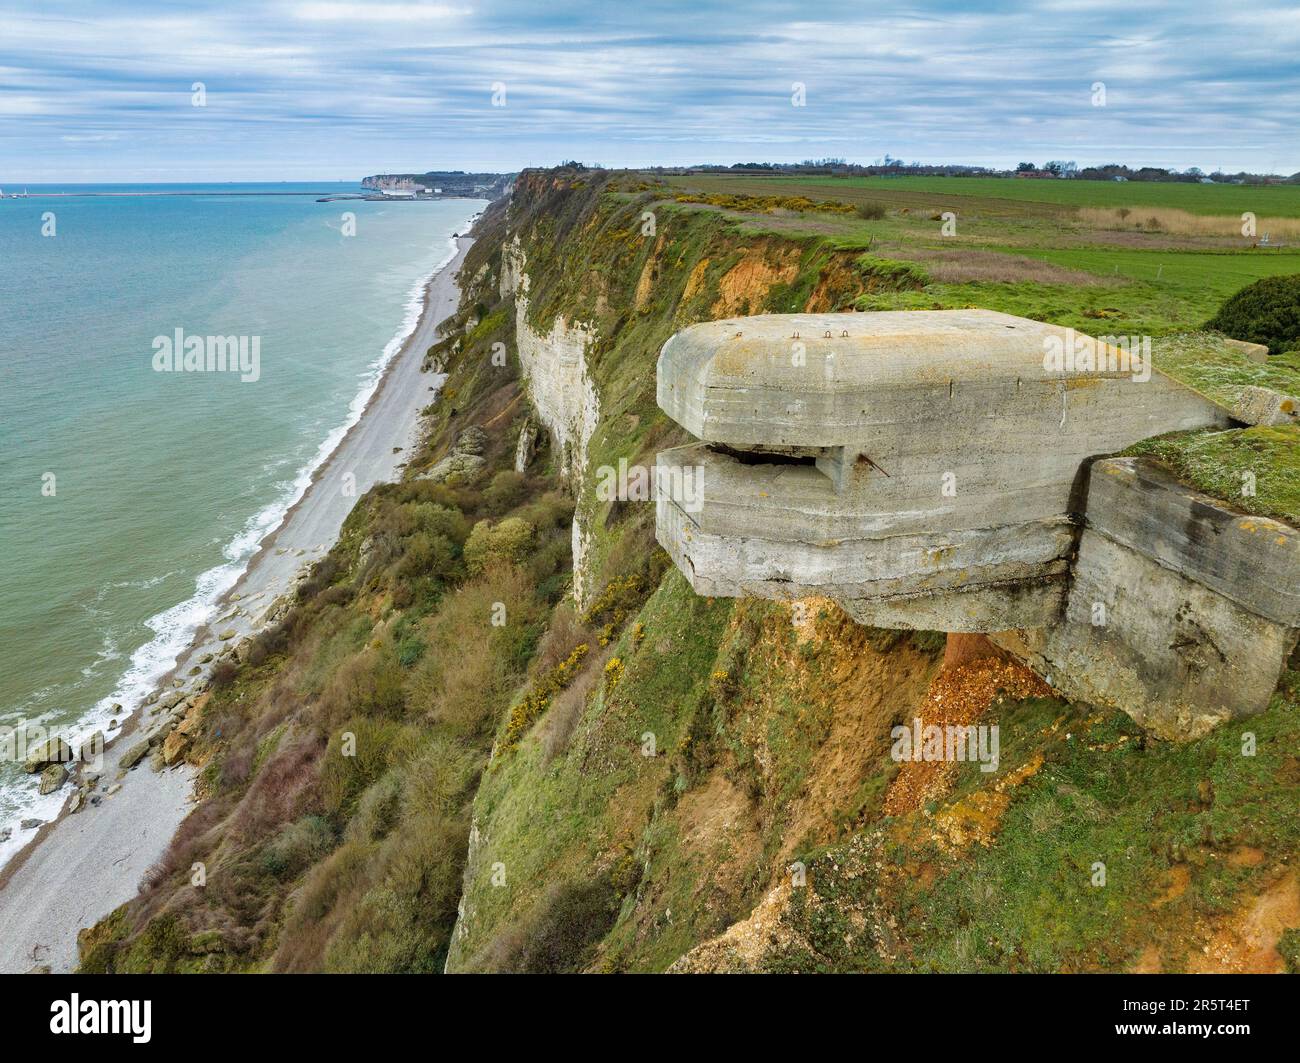 France, Seine Maritime, Heuqueville, Cote d'Abatre, the blockhouse of a German battery in the void following the erosion of the cliff (aerial view) Stock Photo